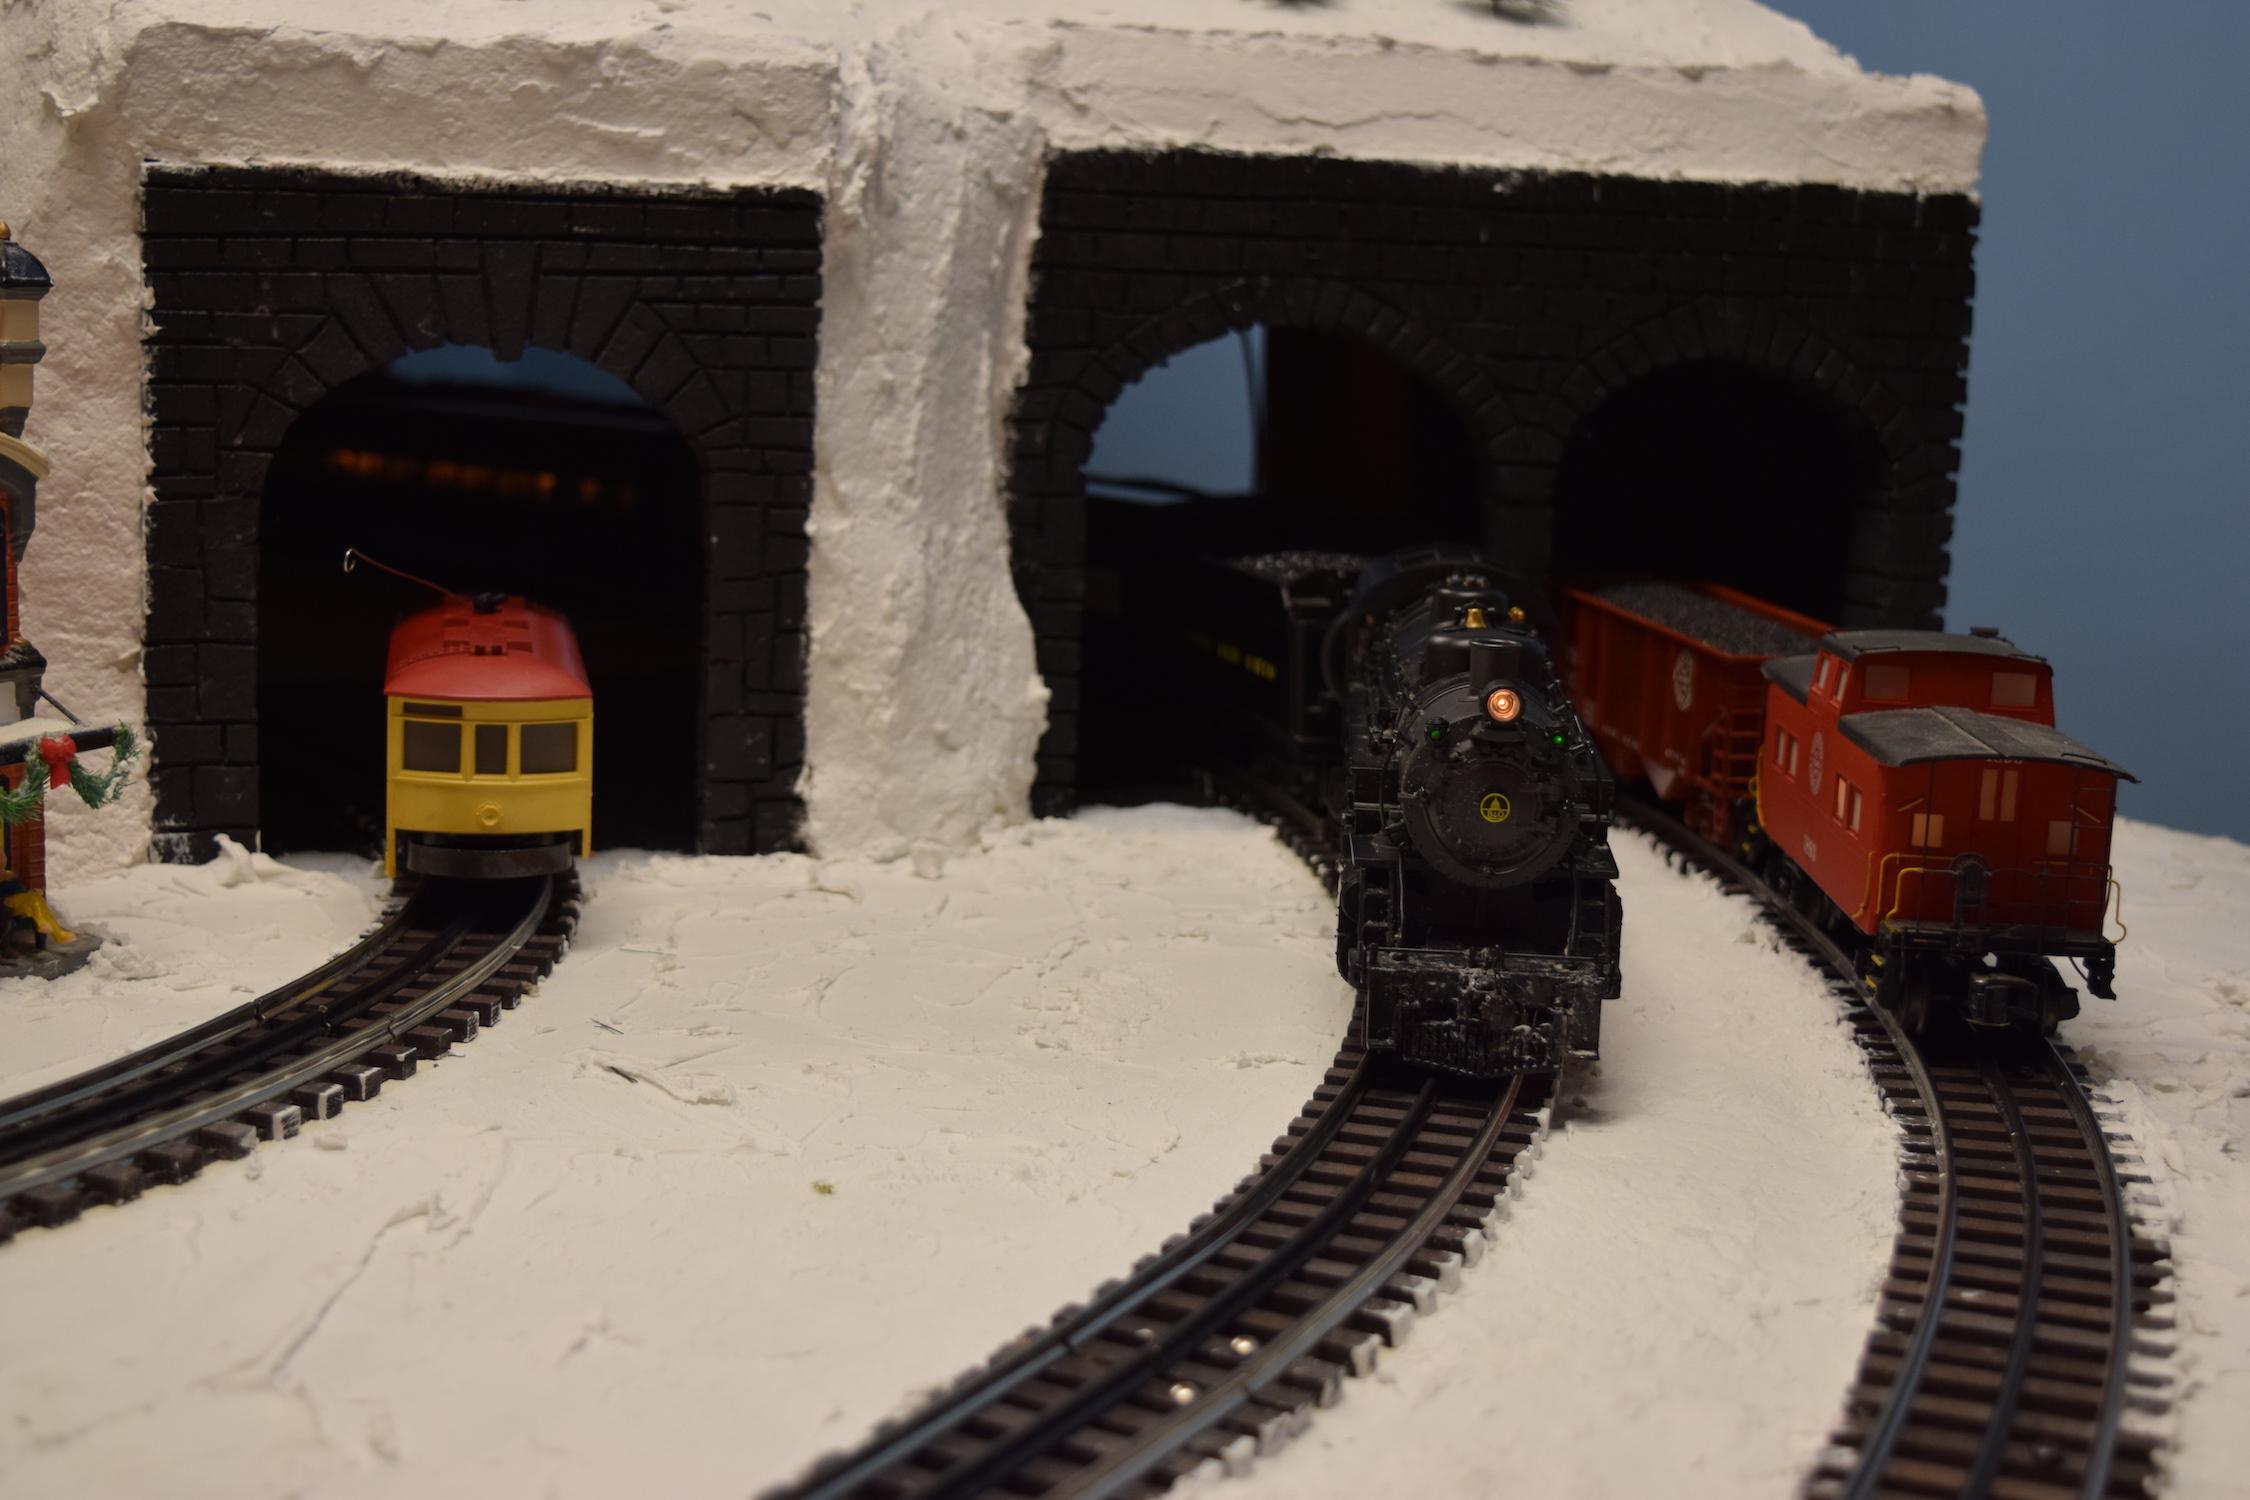 A snowy mountain scene with trains entering and exiting a dual tunnel on the mountainside - "Christmas at the Roundhouse" model train display.